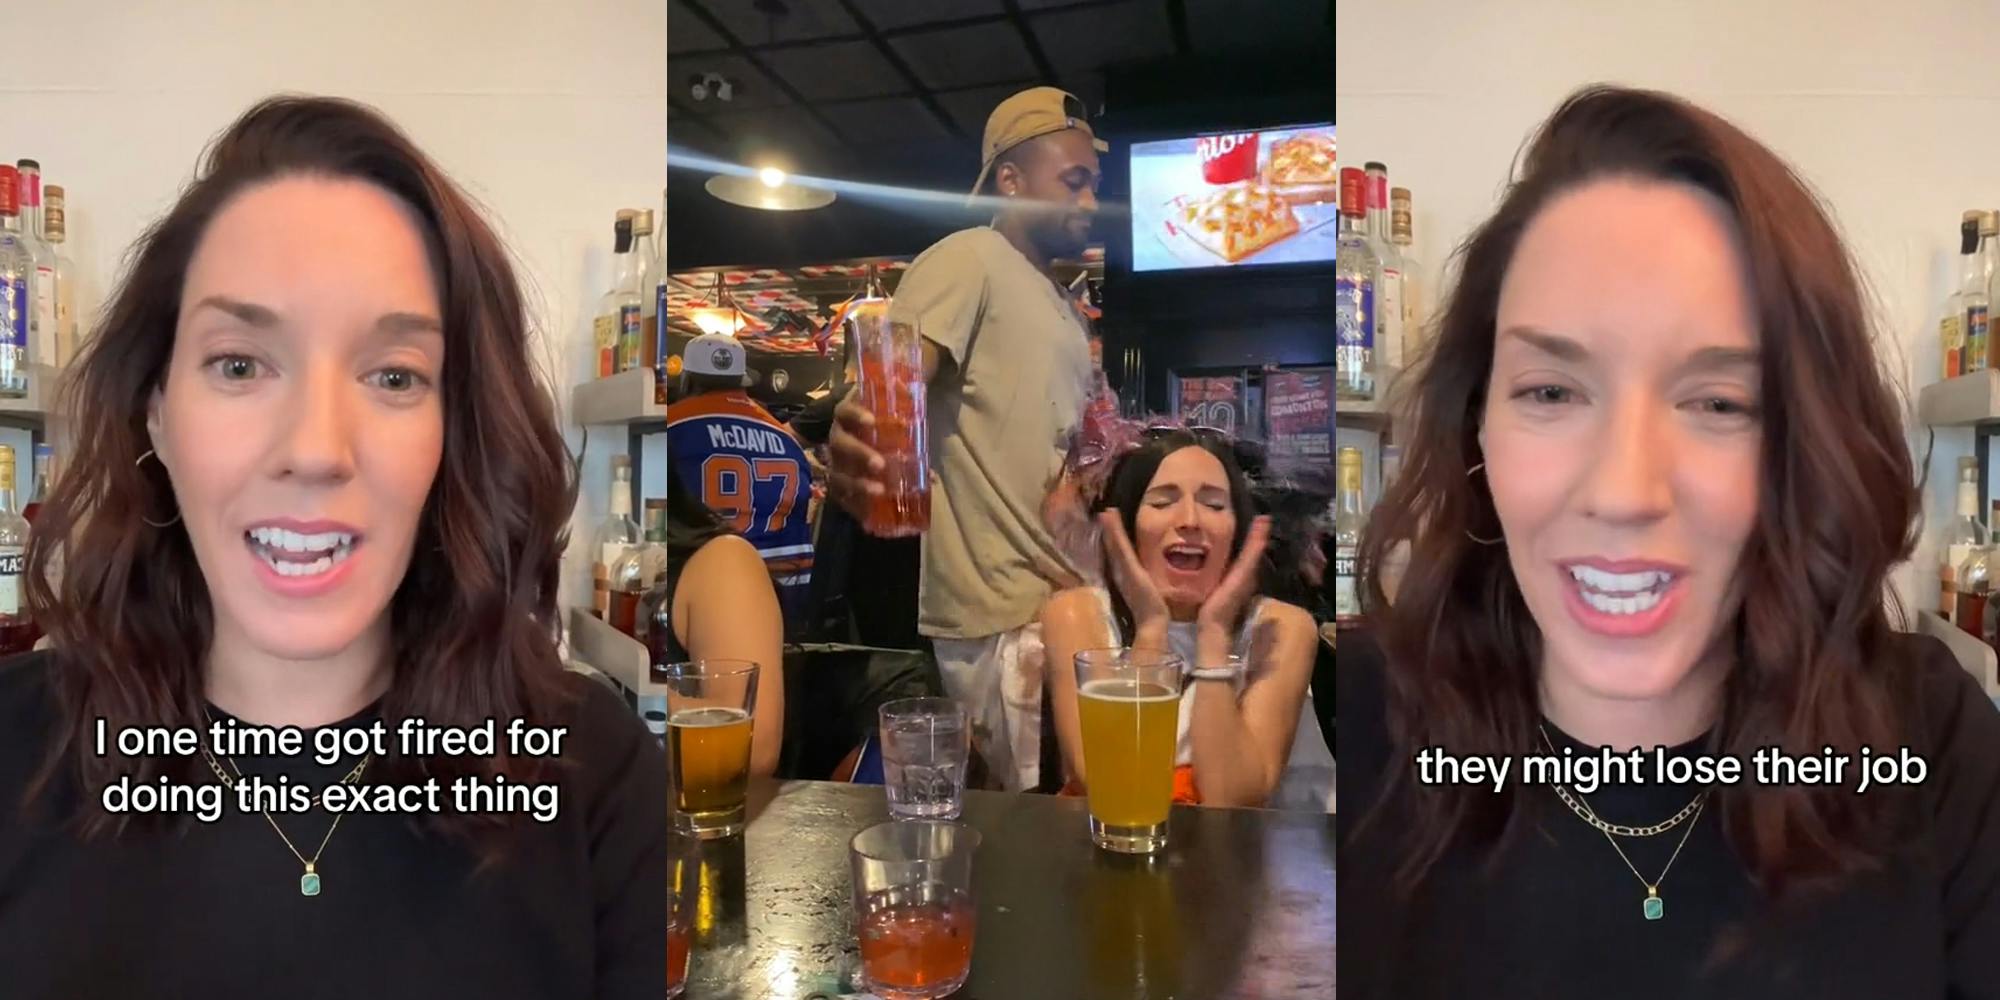 server speaking with caption "I one time got fired for doing the exact same thing" (l) server accidentally spilling drinks on customer (c) server speaking with caption "they might lose their job" (r)